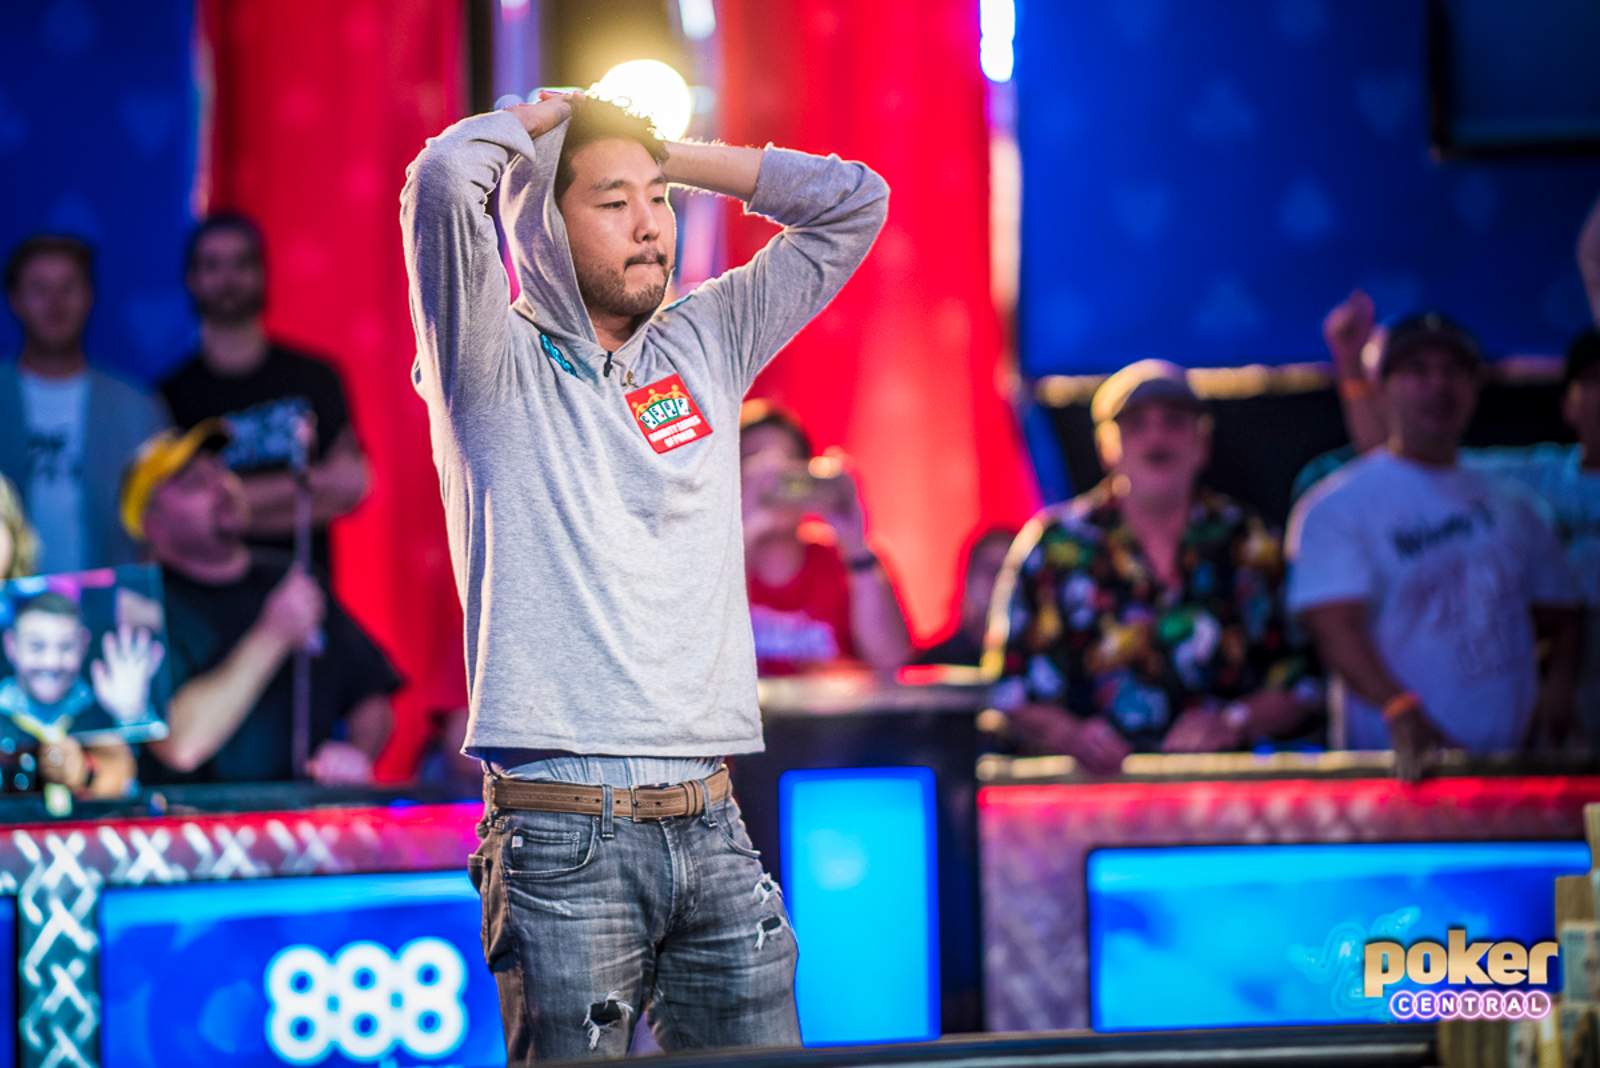 Speechless and Overwhelmed, John Cynn Etches His Name Into Poker History with 2018 WSOP Main Event Win